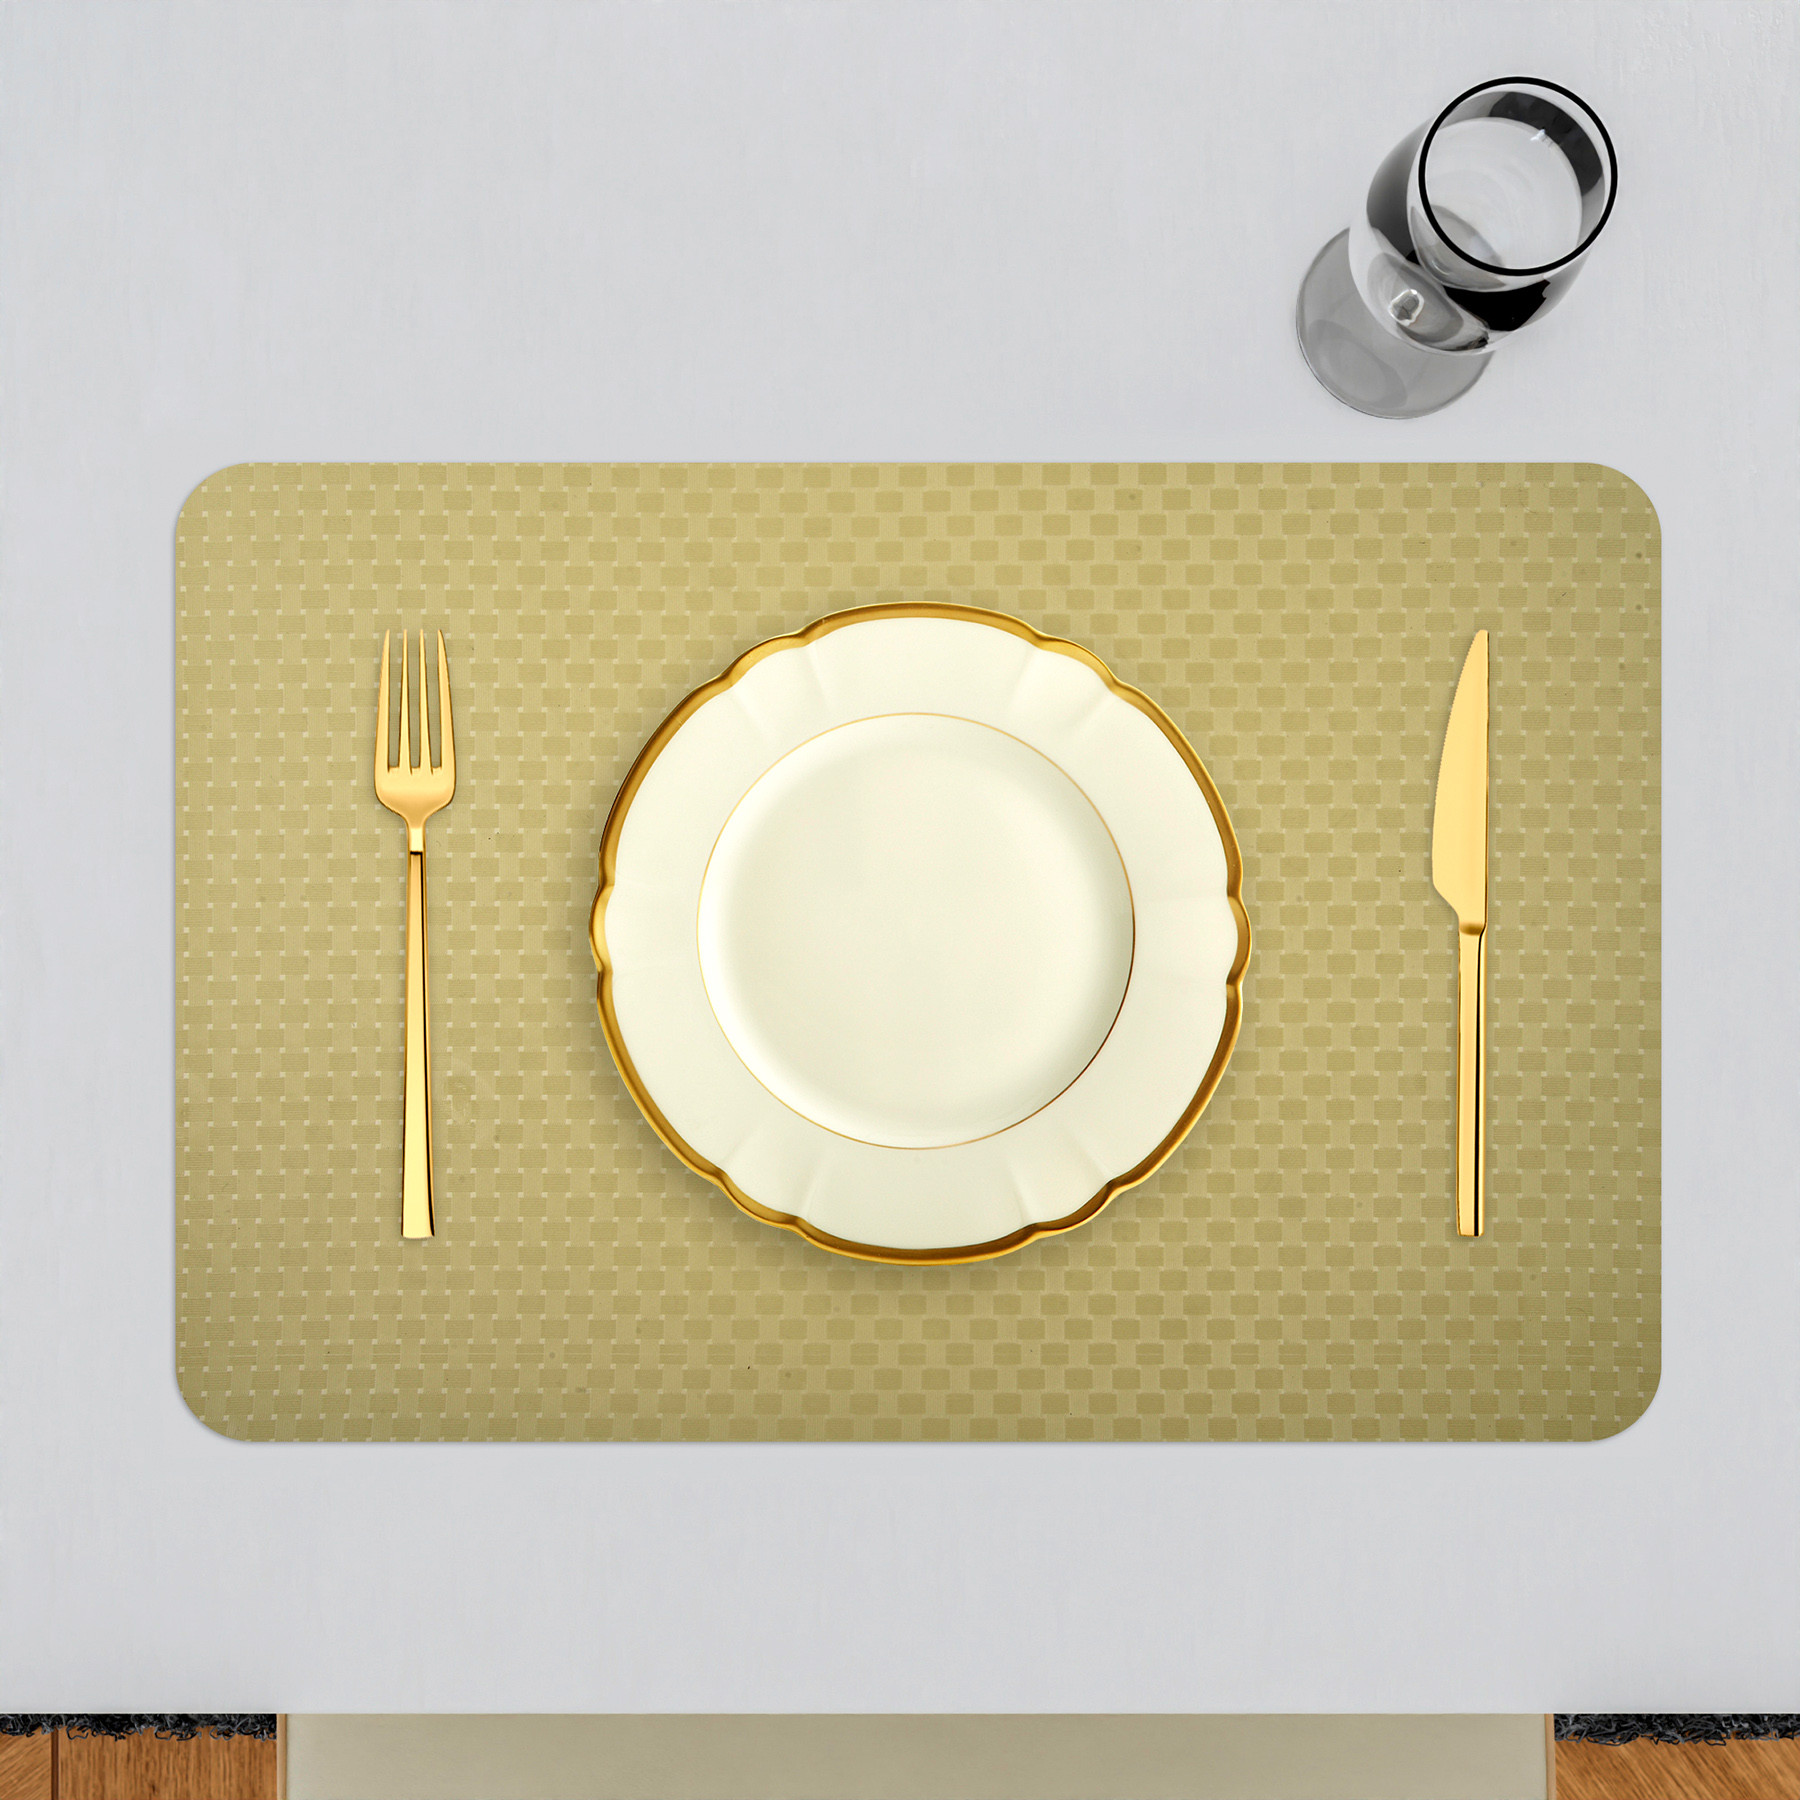 Kuber Industries Placemat | Placemats for Dining Room | Table Mat Set | Placemats for Kitchen Table | Dining Table Placemats | Check-Design Placemat | 6 Piece Set | Beige